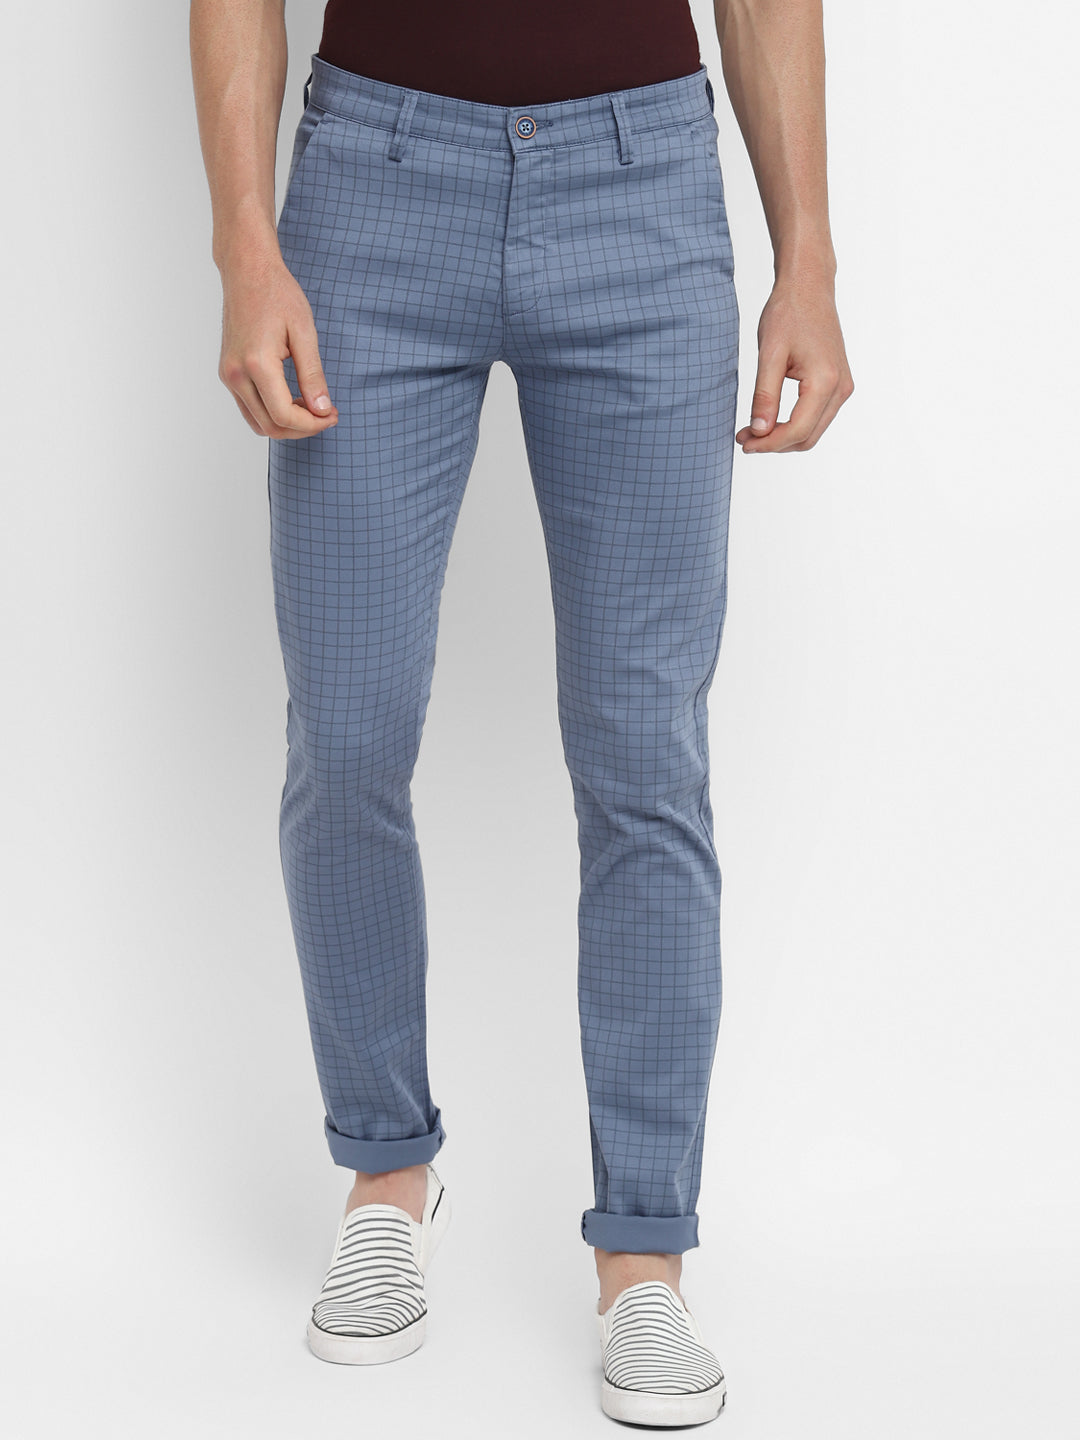 Blue Checked Ultra Slim Fit Trouser